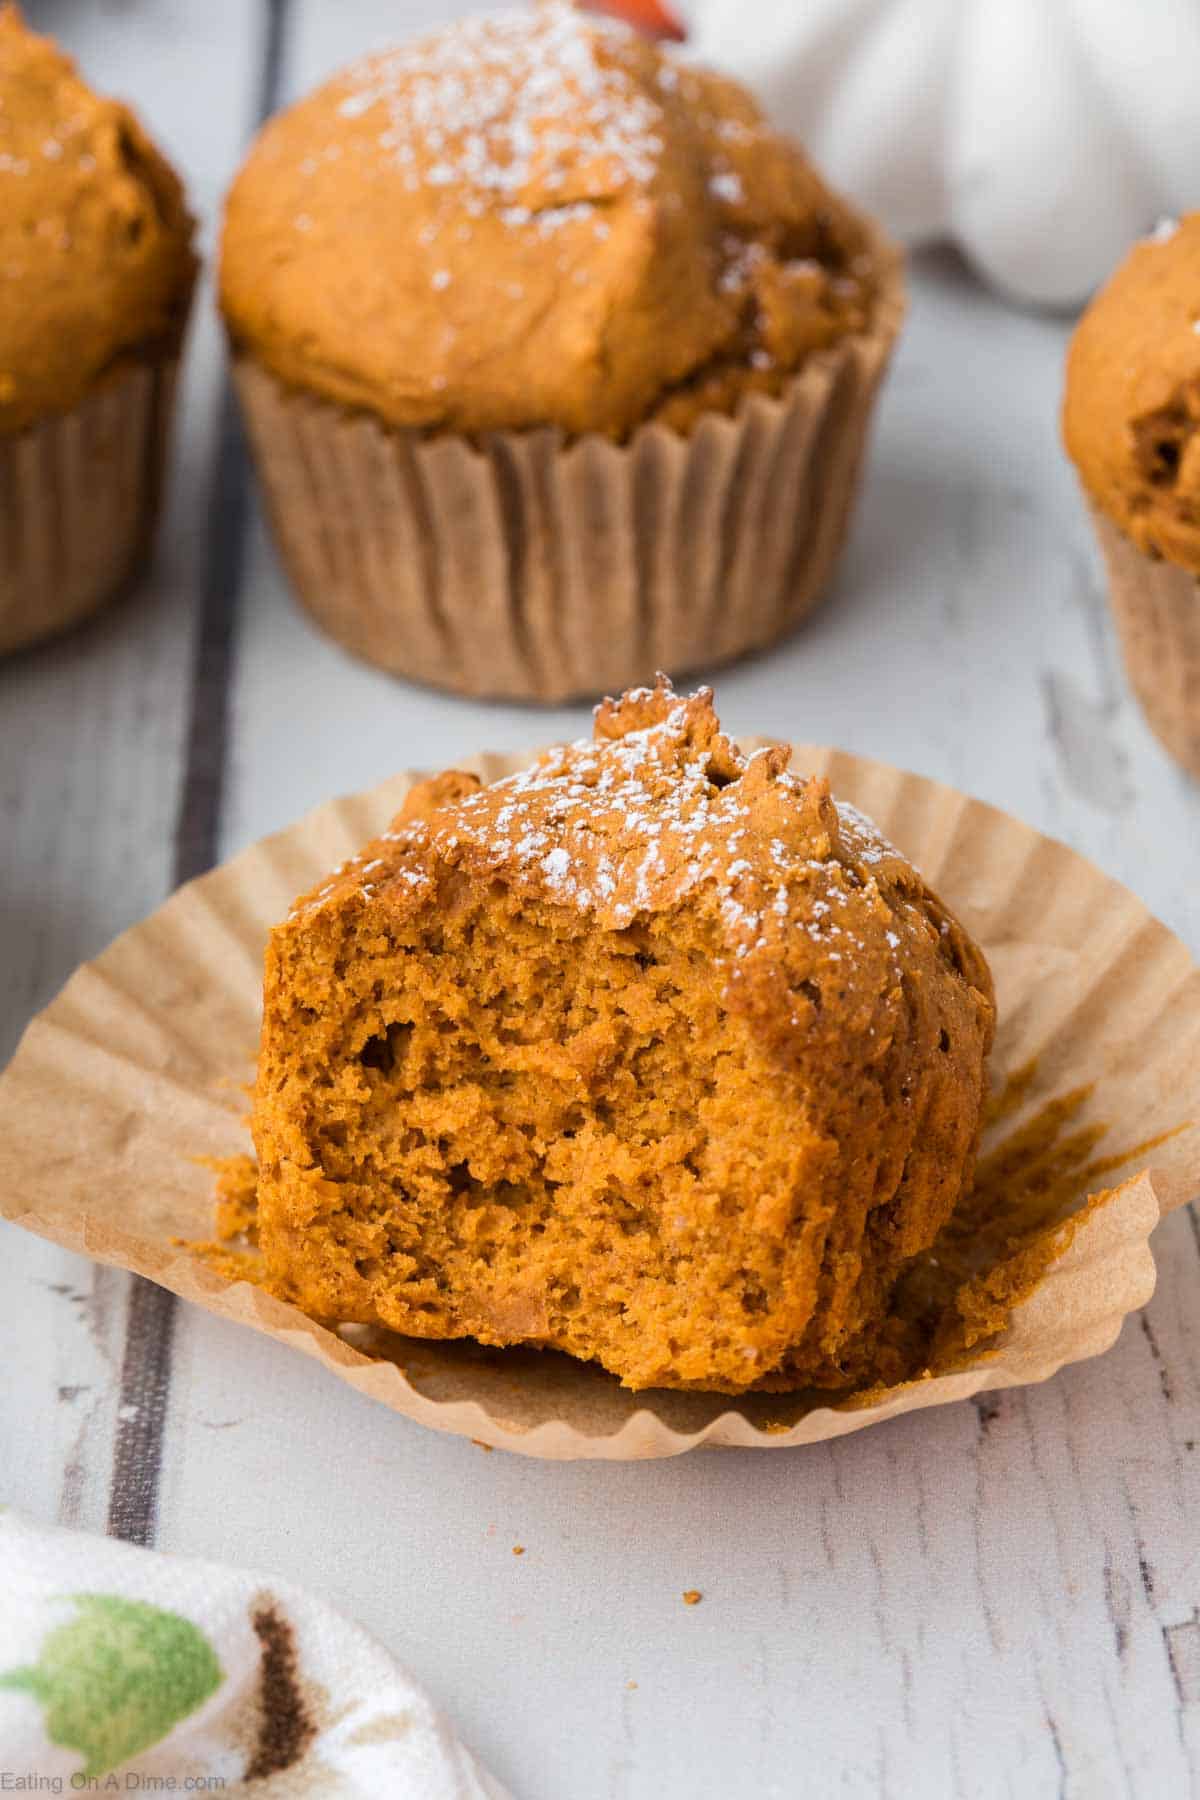 A close-up of a 2 Ingredient Pumpkin Muffin with a bite taken out sits partially unwrapped from its paper liner. The muffin is sprinkled with powdered sugar, adding a touch of sweetness. Two more intact muffins are seen in the background on a white wooden surface, inviting you to indulge.